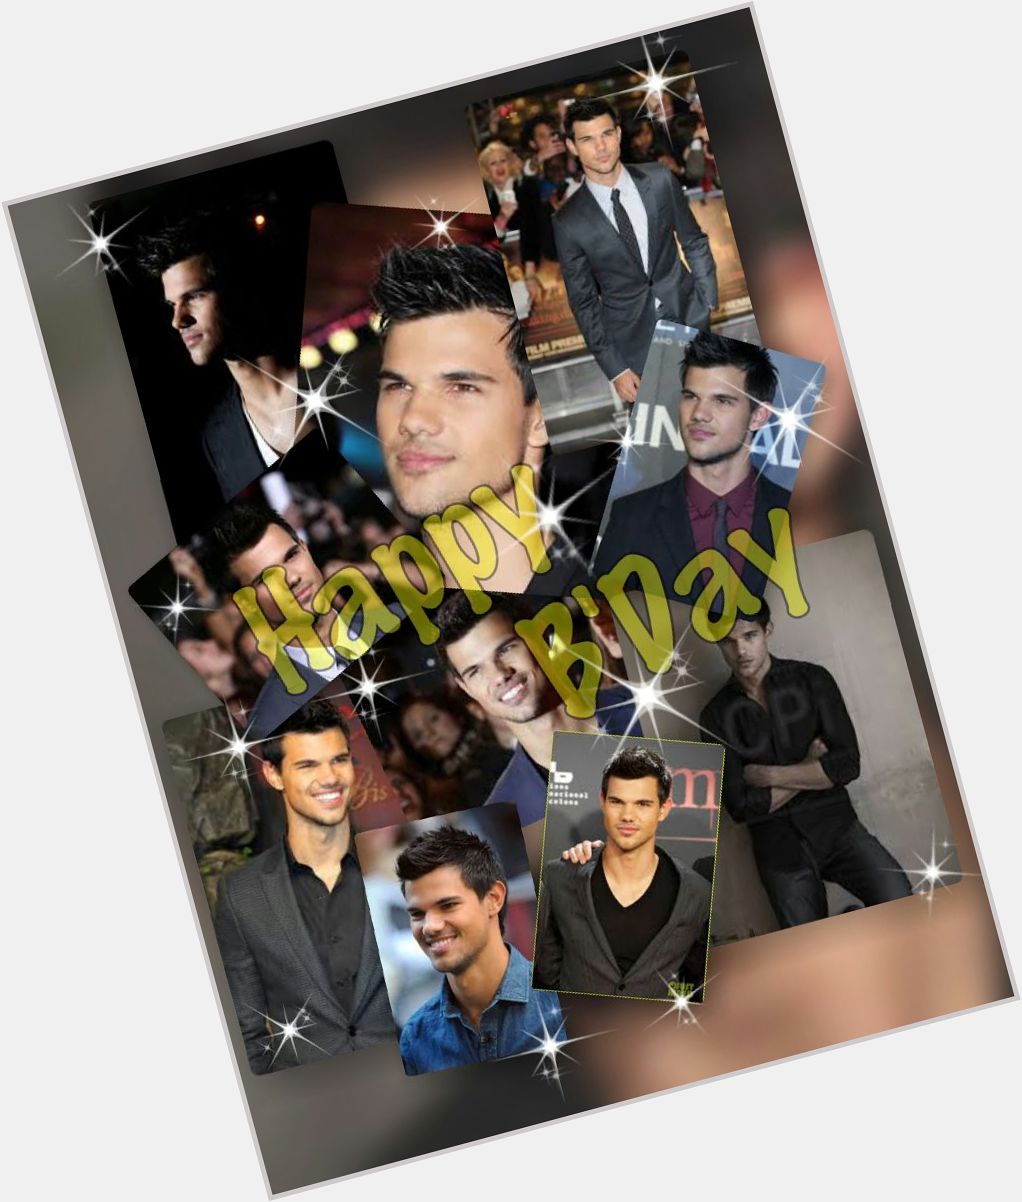  Happy birthday TAYLOR LAUTNER from your biggest fan anim ana. May god bless you 